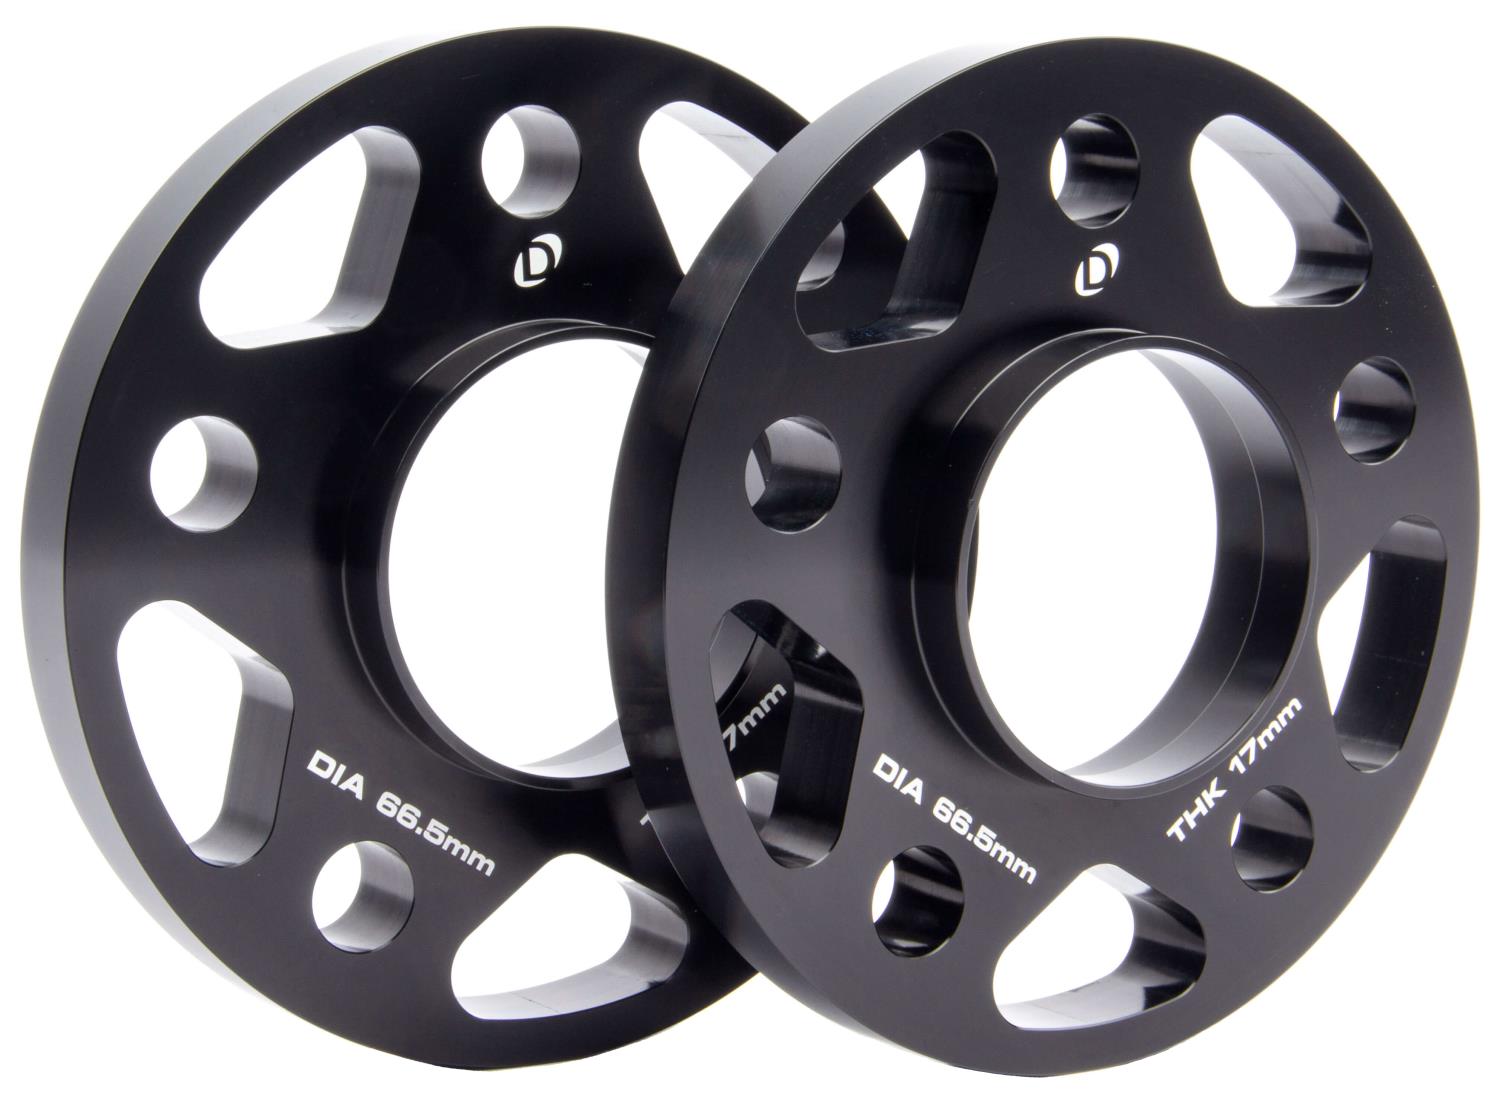 Machined Aluminum Wheel Spacers [17 mm Thick] for Select Late-Model BMW Cars/SUVs, Mini Cooper, Toyota GR Supra  [Black]